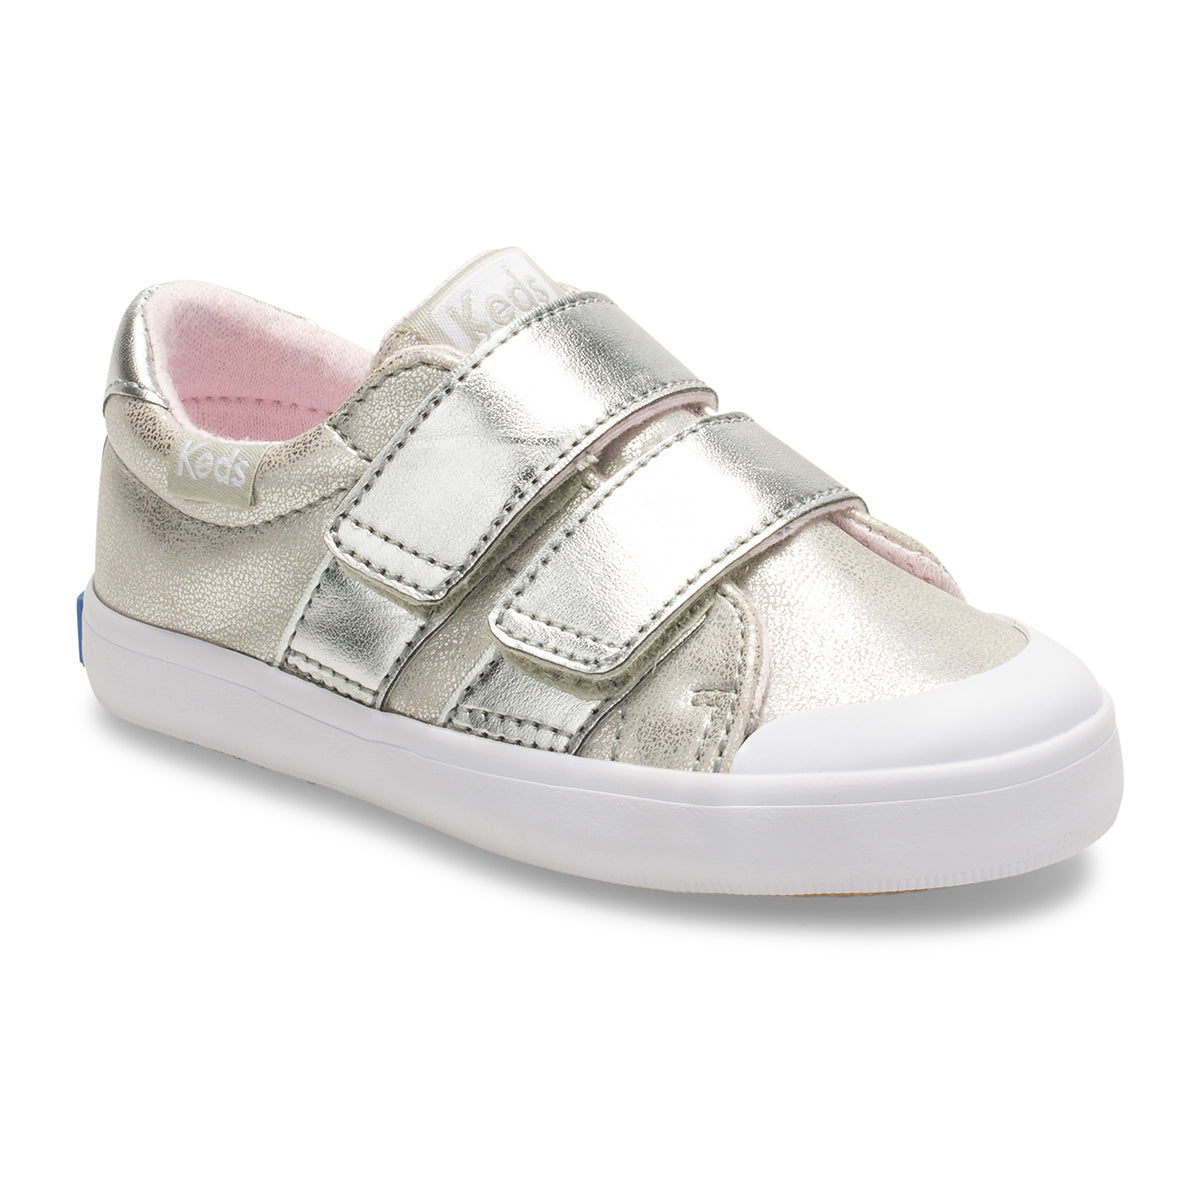 Women's Leather Sneaker Shoe with Double Hook-and-Loop Straps-Wide Width White 6